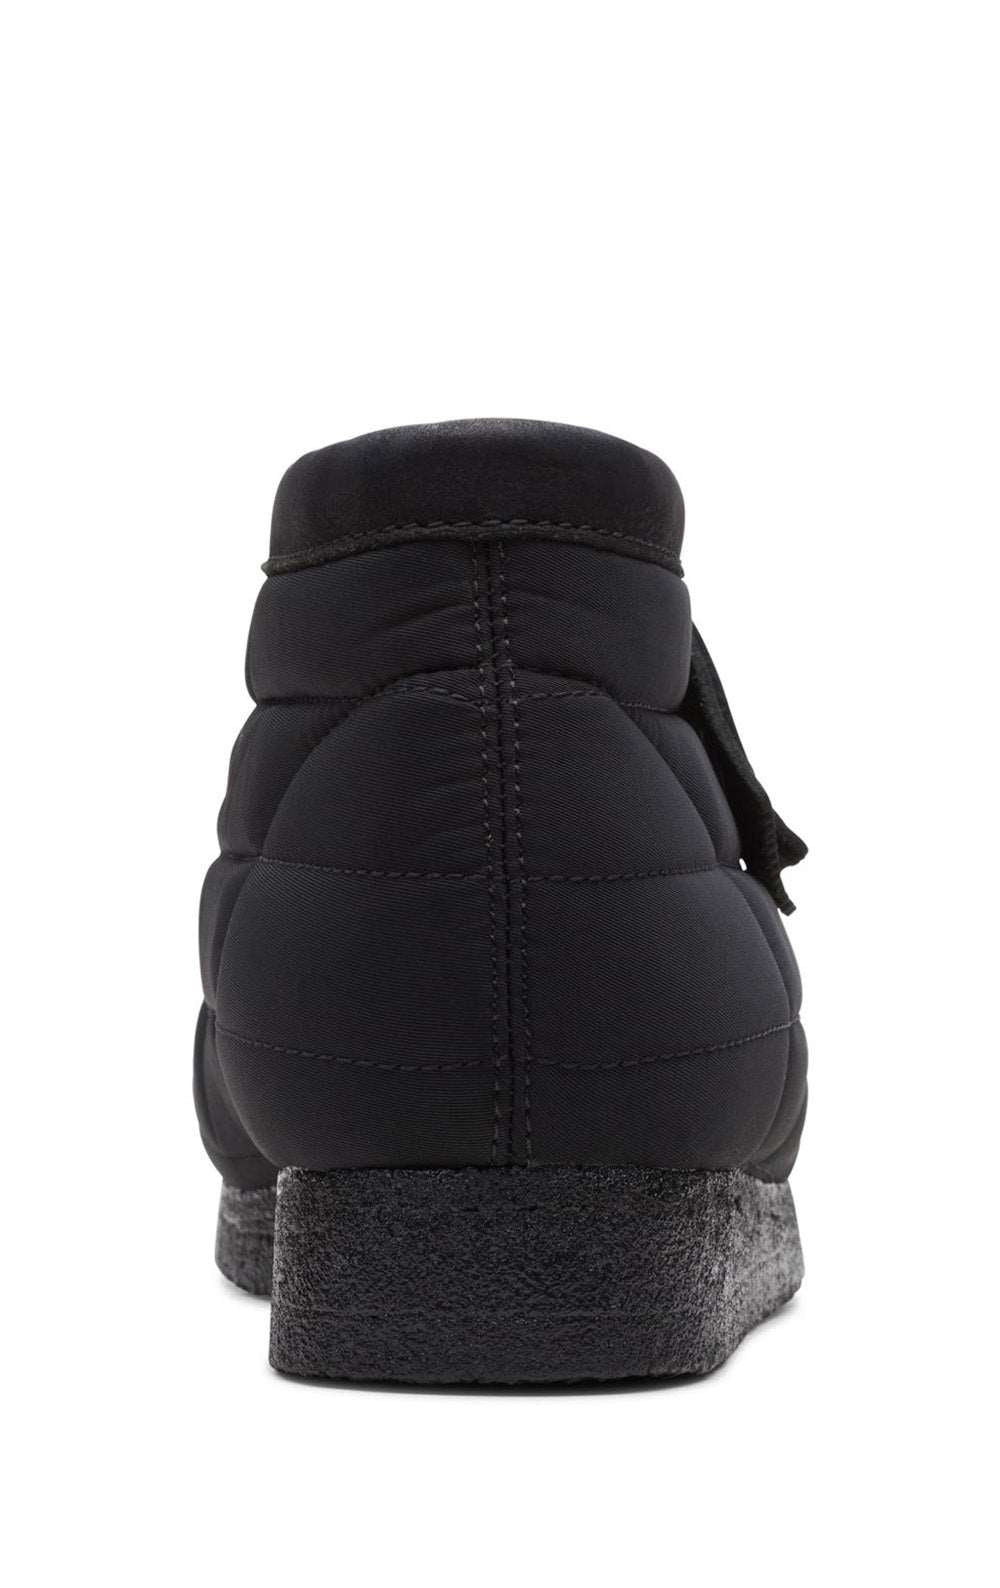 (26168801) Wallabee Boots - Black Quilted